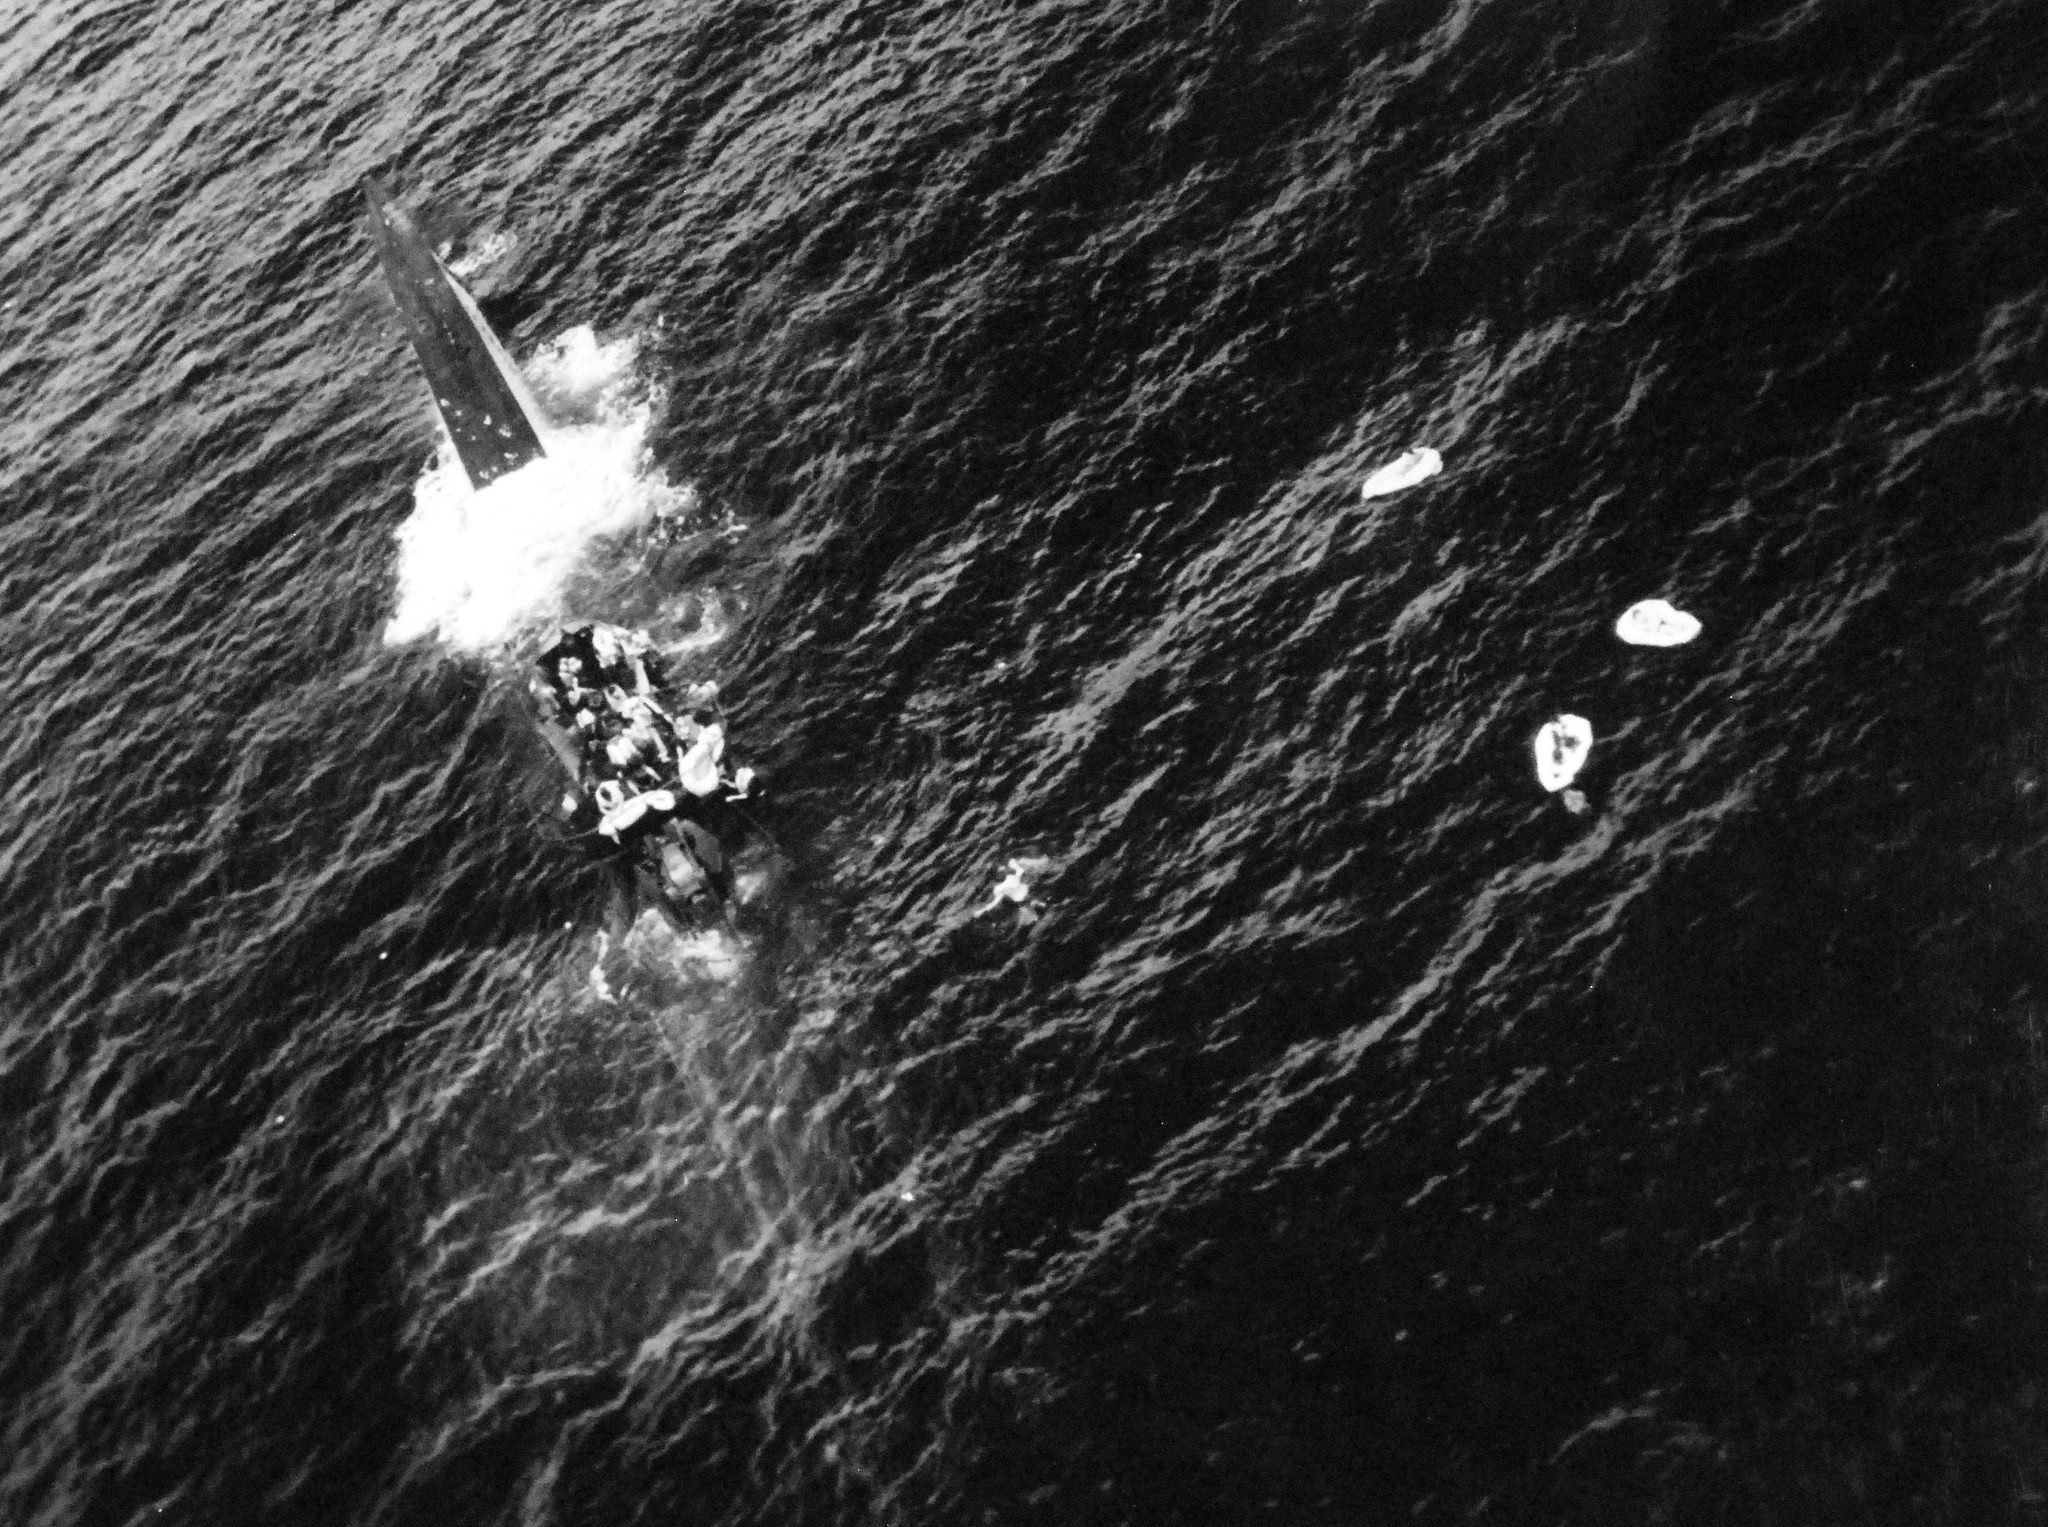 German submarine U-664 lying dead in the water and sinking by the stern as her crew abandoned ship following an air attack from USS Card aircraft in the mid-Atlantic, 9 Aug 1943. Photo 1 of 2.